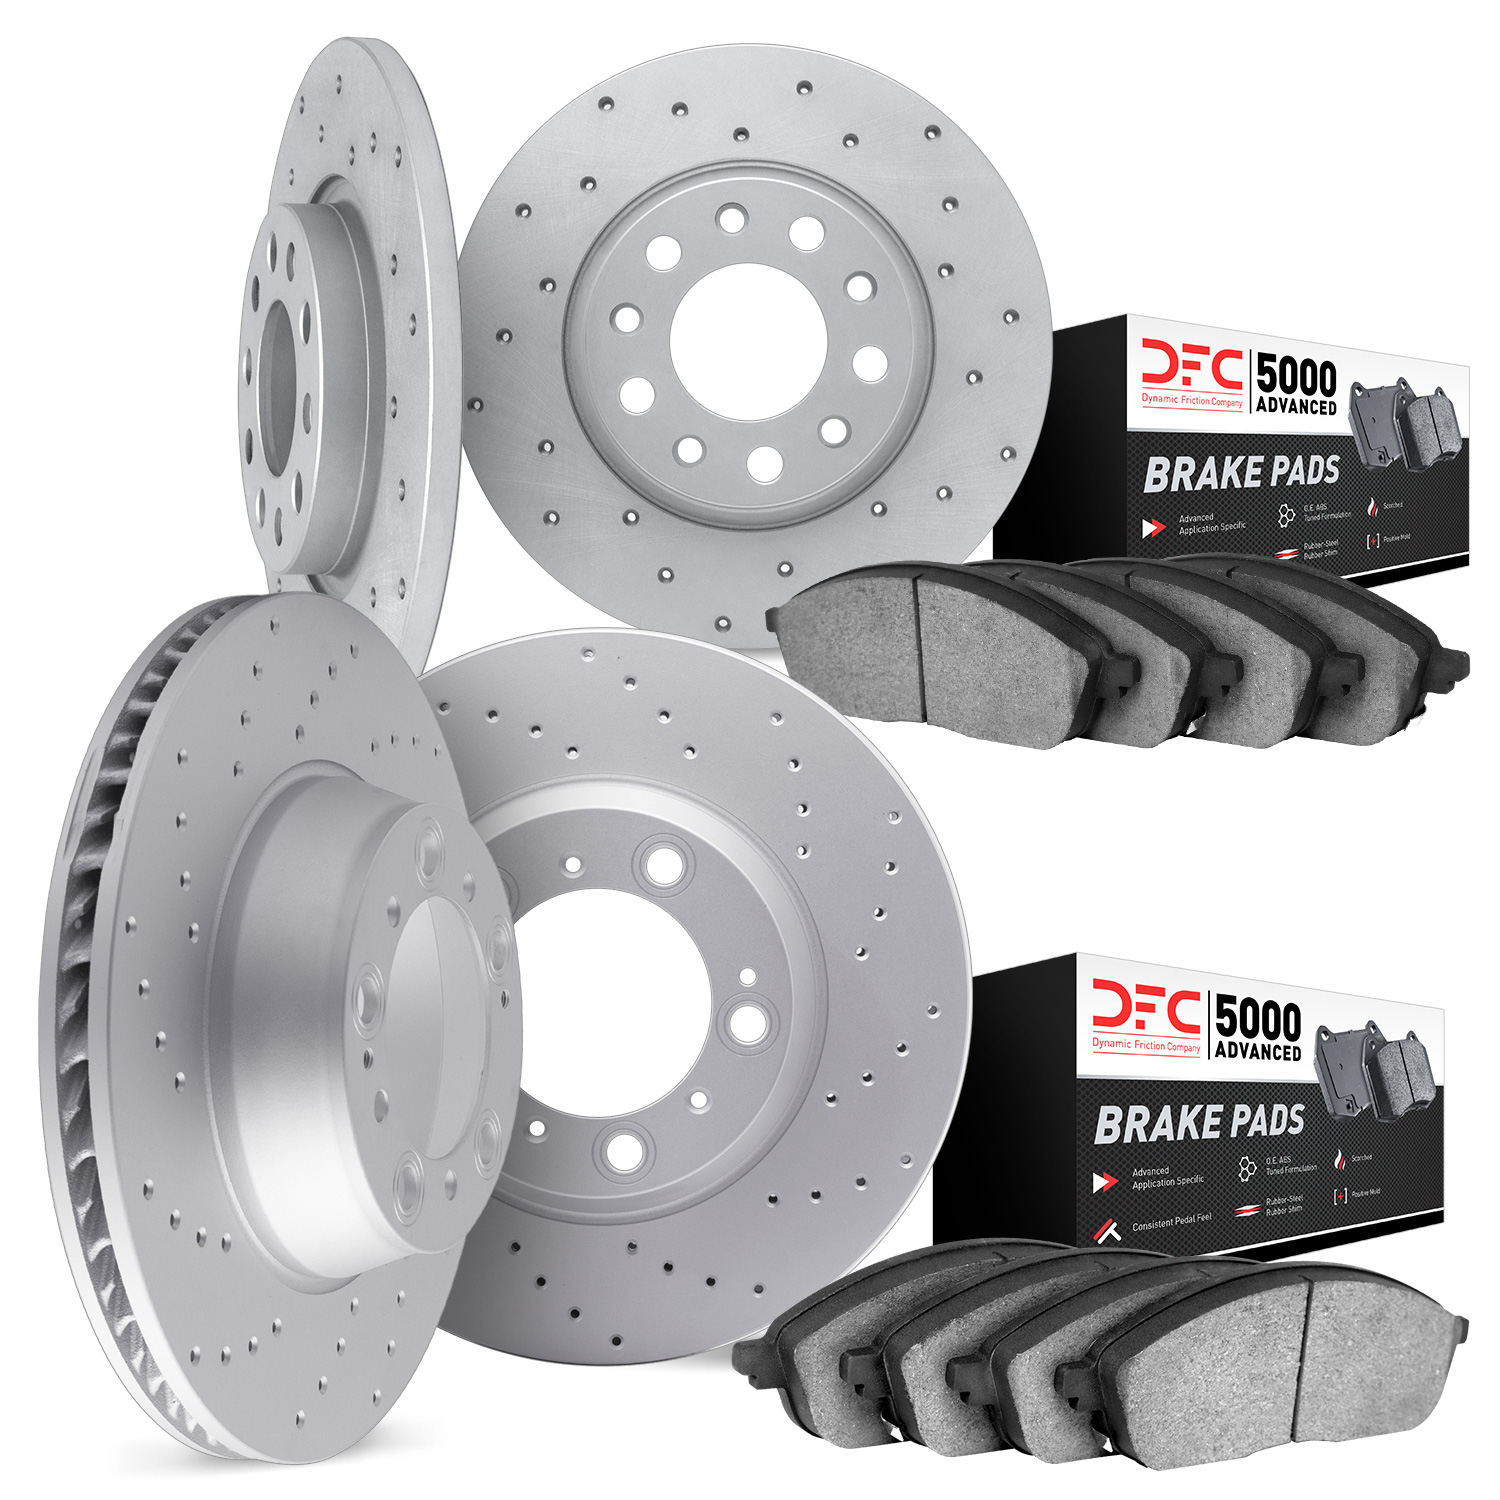 2704-72018 Geoperformance Drilled Brake Rotors with Active Performance Pads Kit, 2004-2012 Mitsubishi, Position: Front and Rear